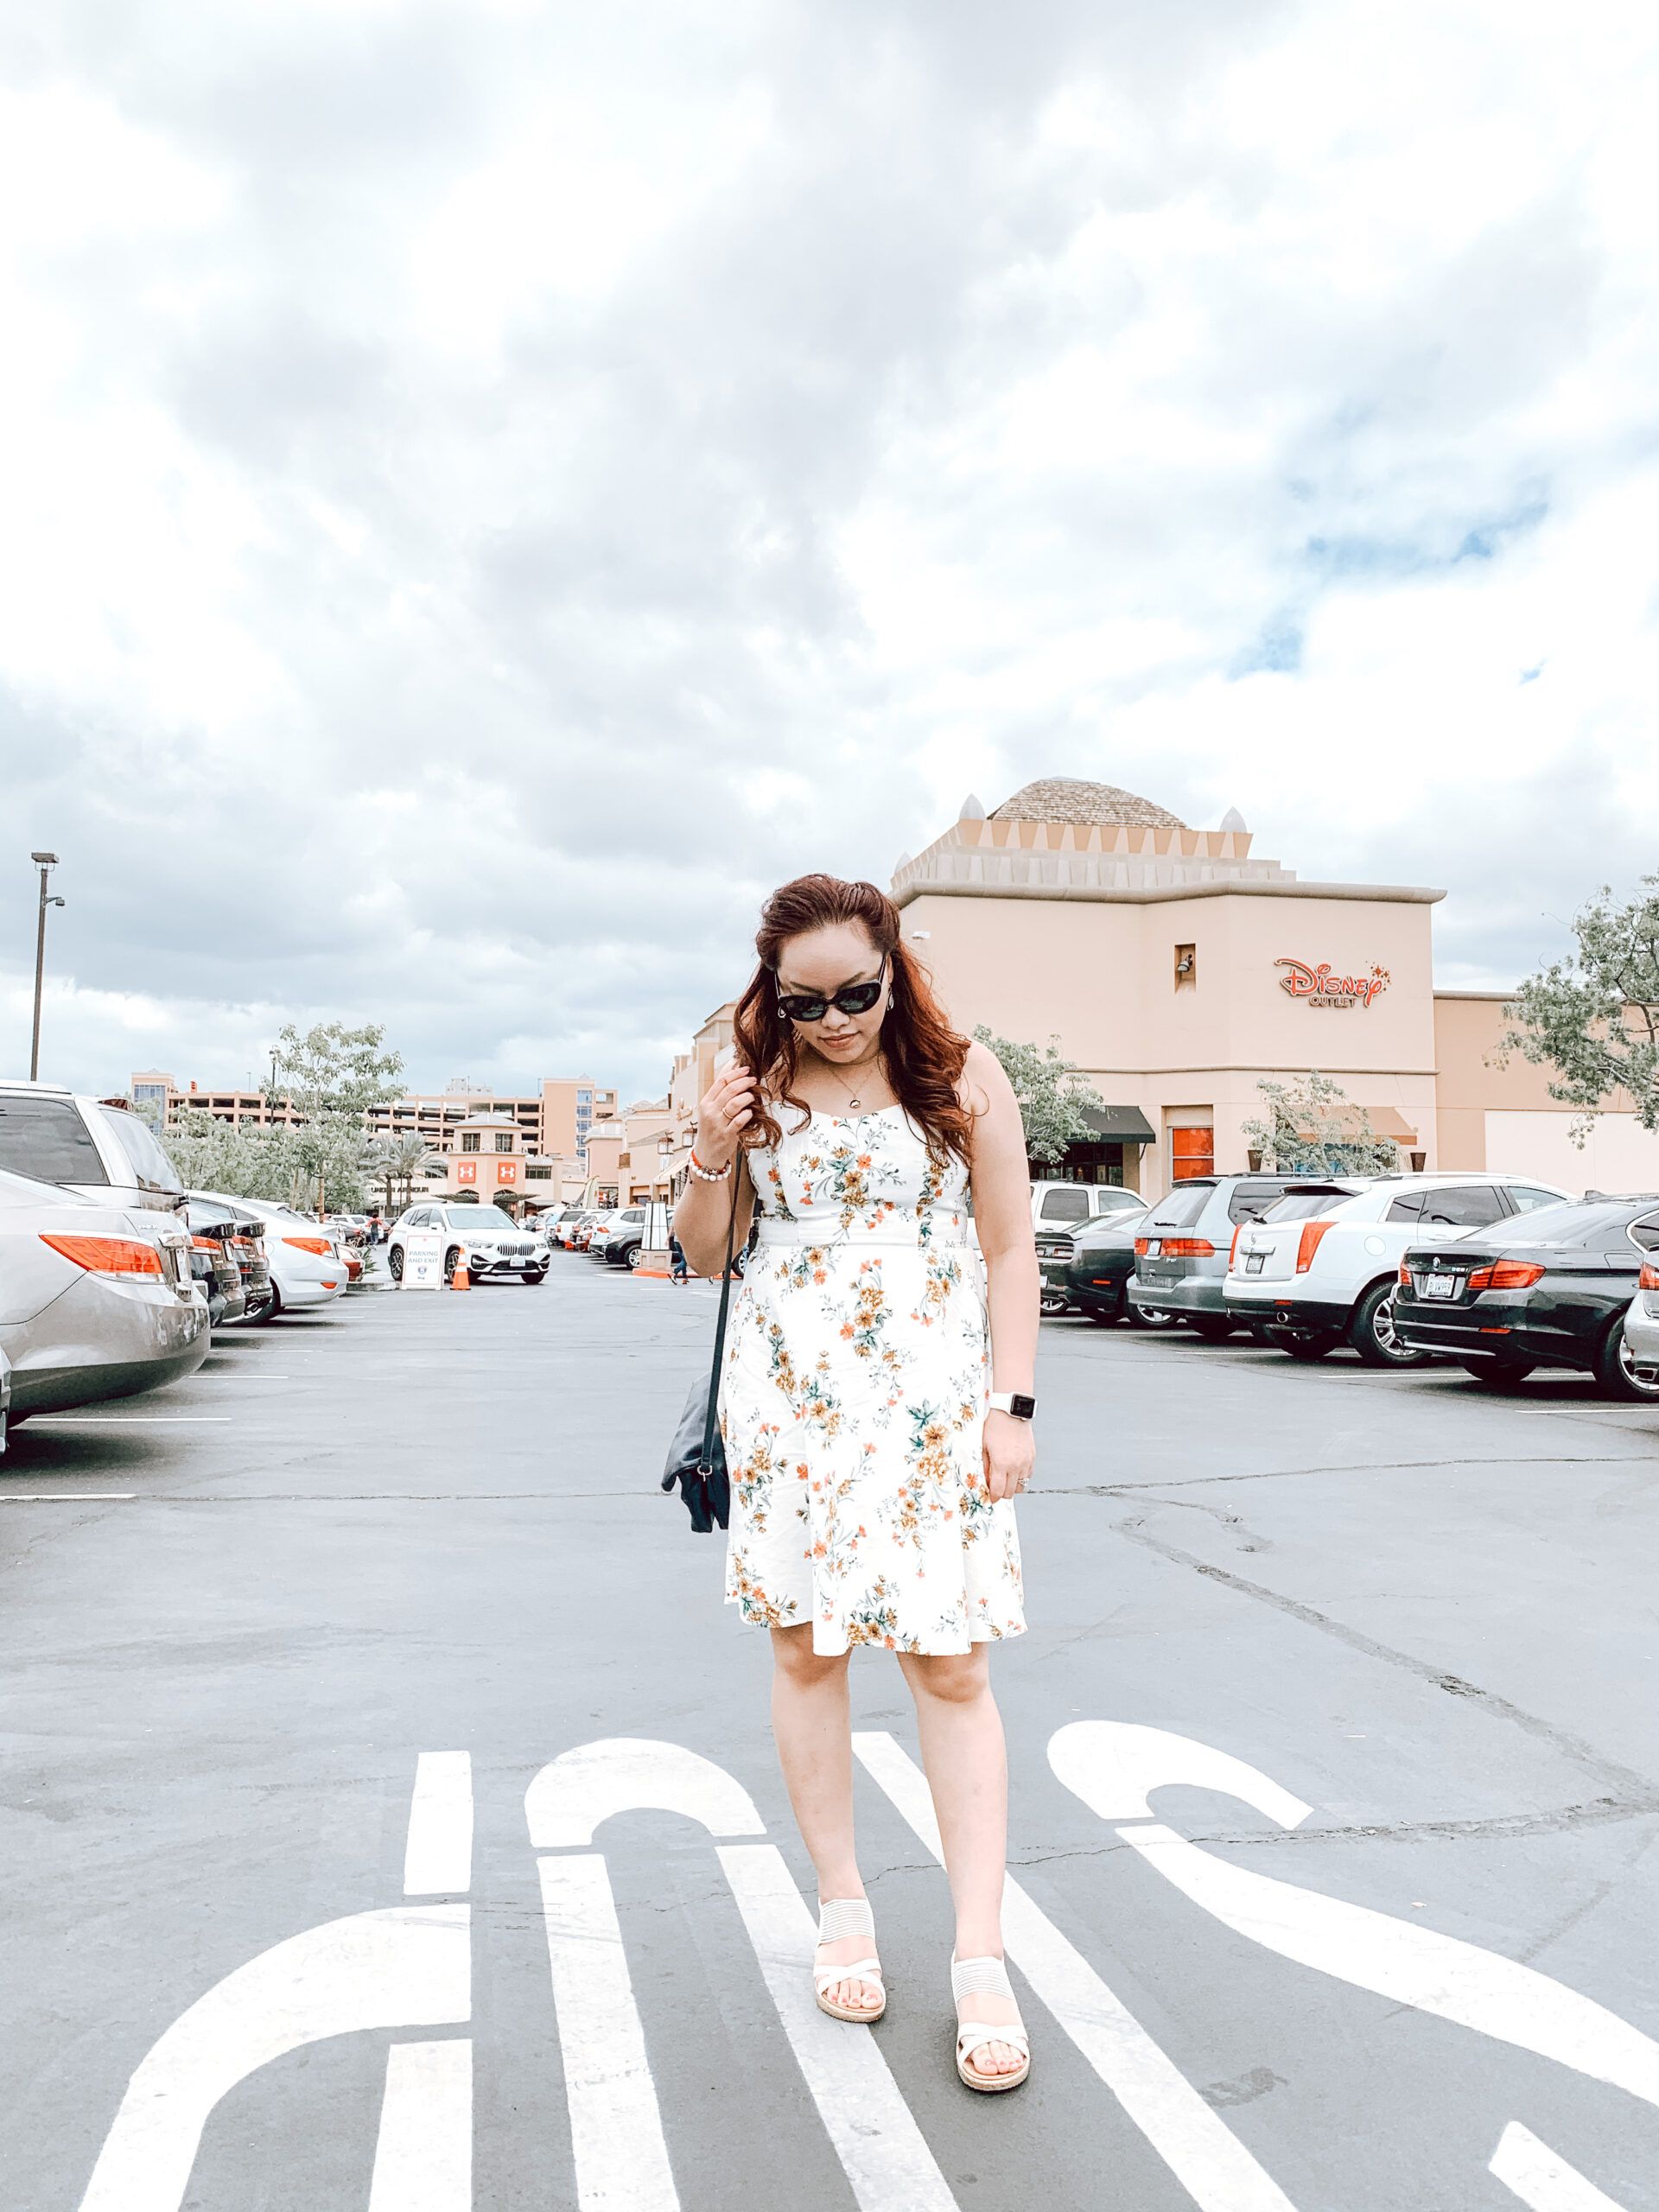 pslilyboutique-on-instagam-pinterest-summer-2020-outfit-ideas-old-navy-white-floral-dress-white-apple-watch-3-series-LA-fashion-blogger-luxury-influencer-luxury-cars-commercial-space-disney-store-6-29-20-IMG_1201